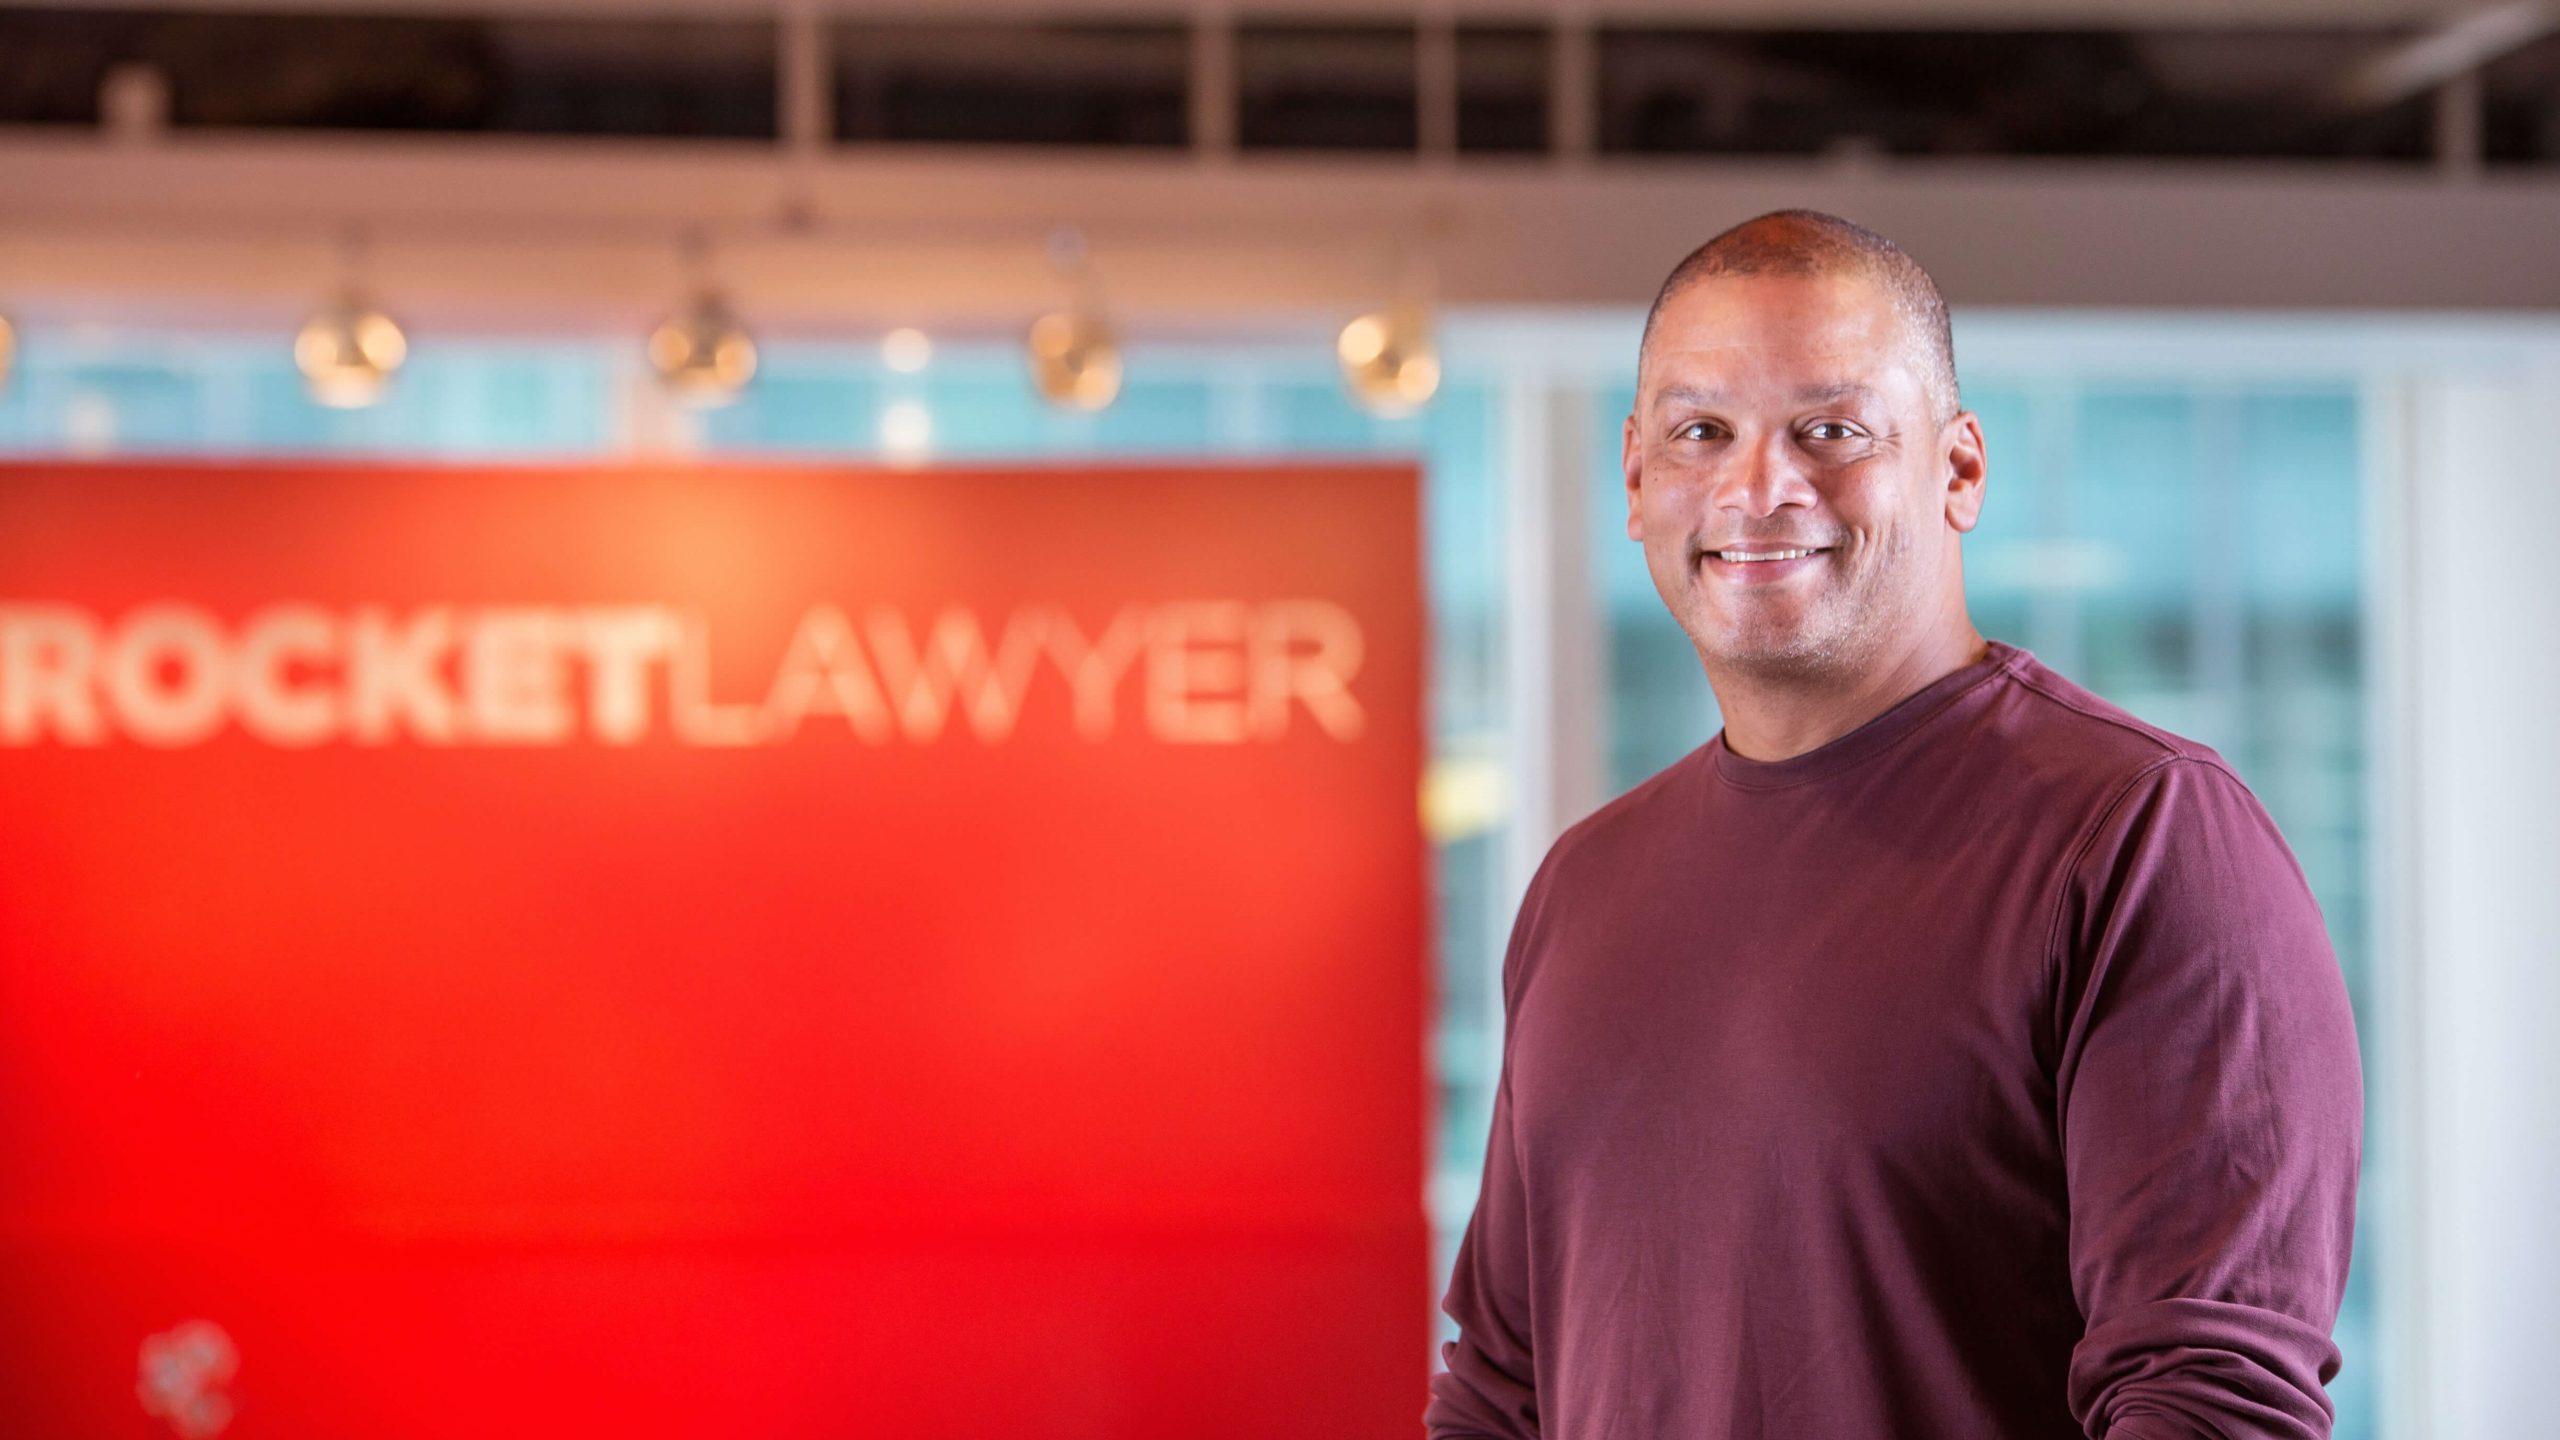 On LawNext: Rocket Lawyer Founder Charley Moore